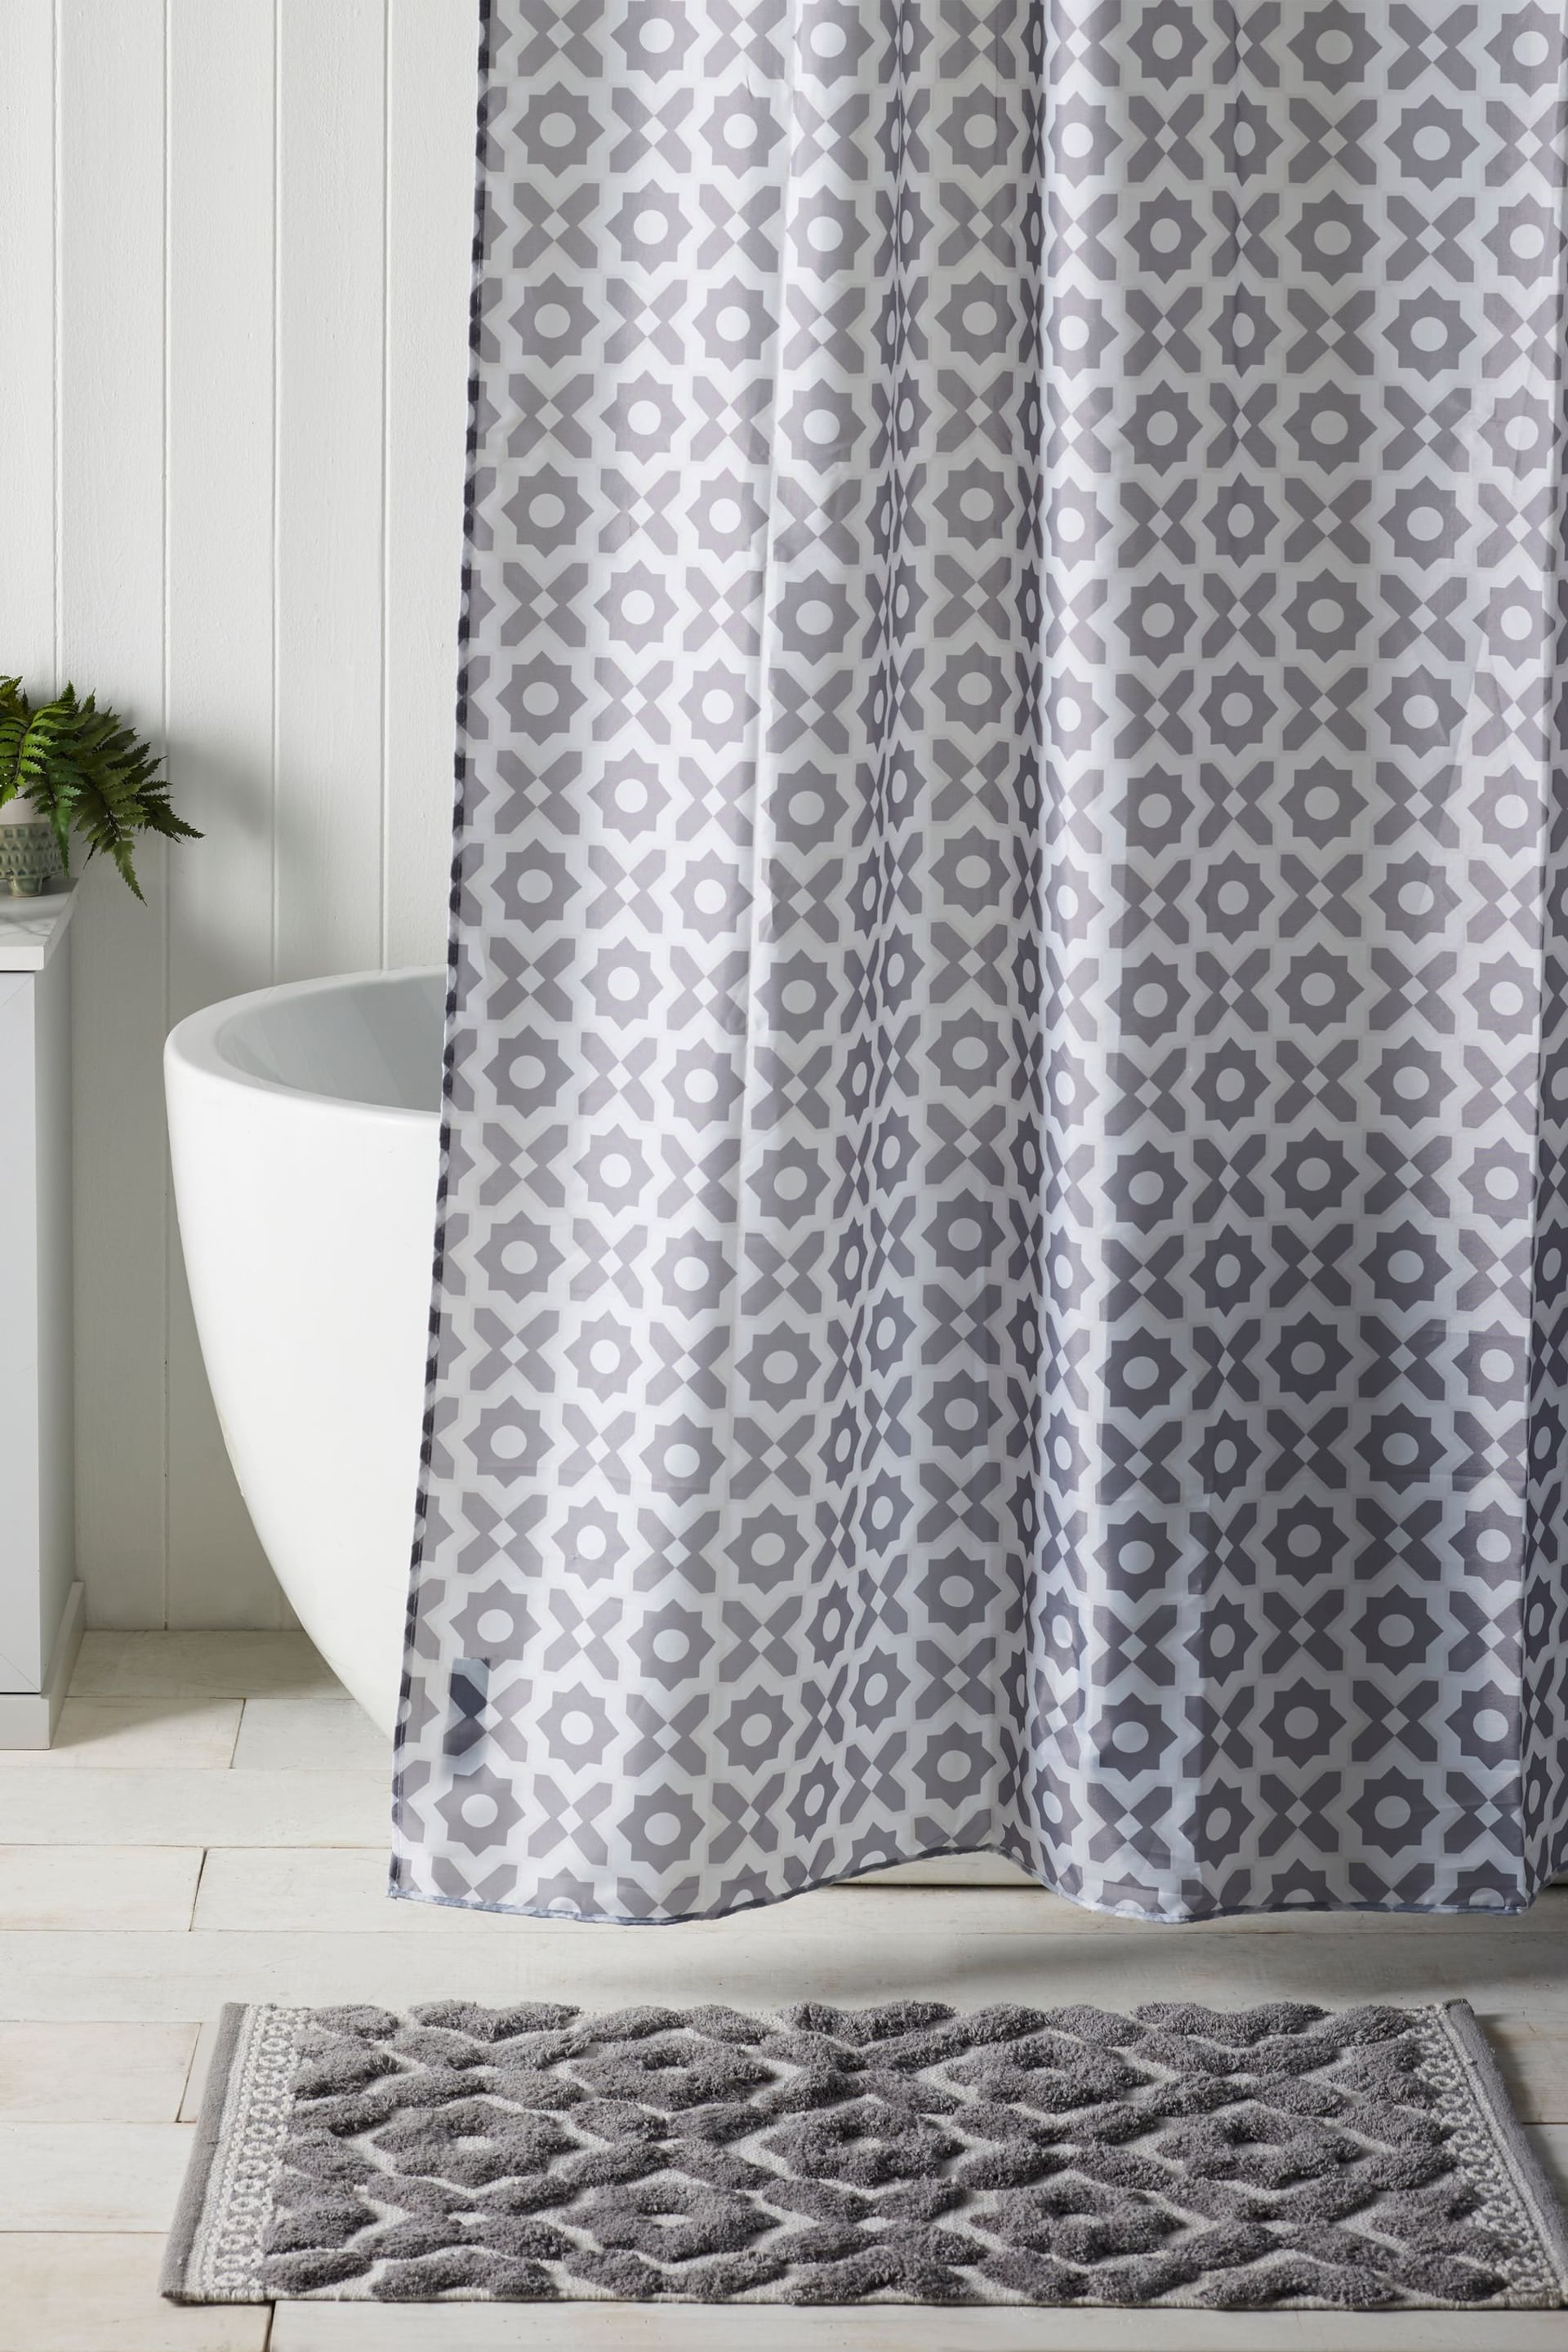 Grey Geo Tile Shower Curtain - Image 1 of 2